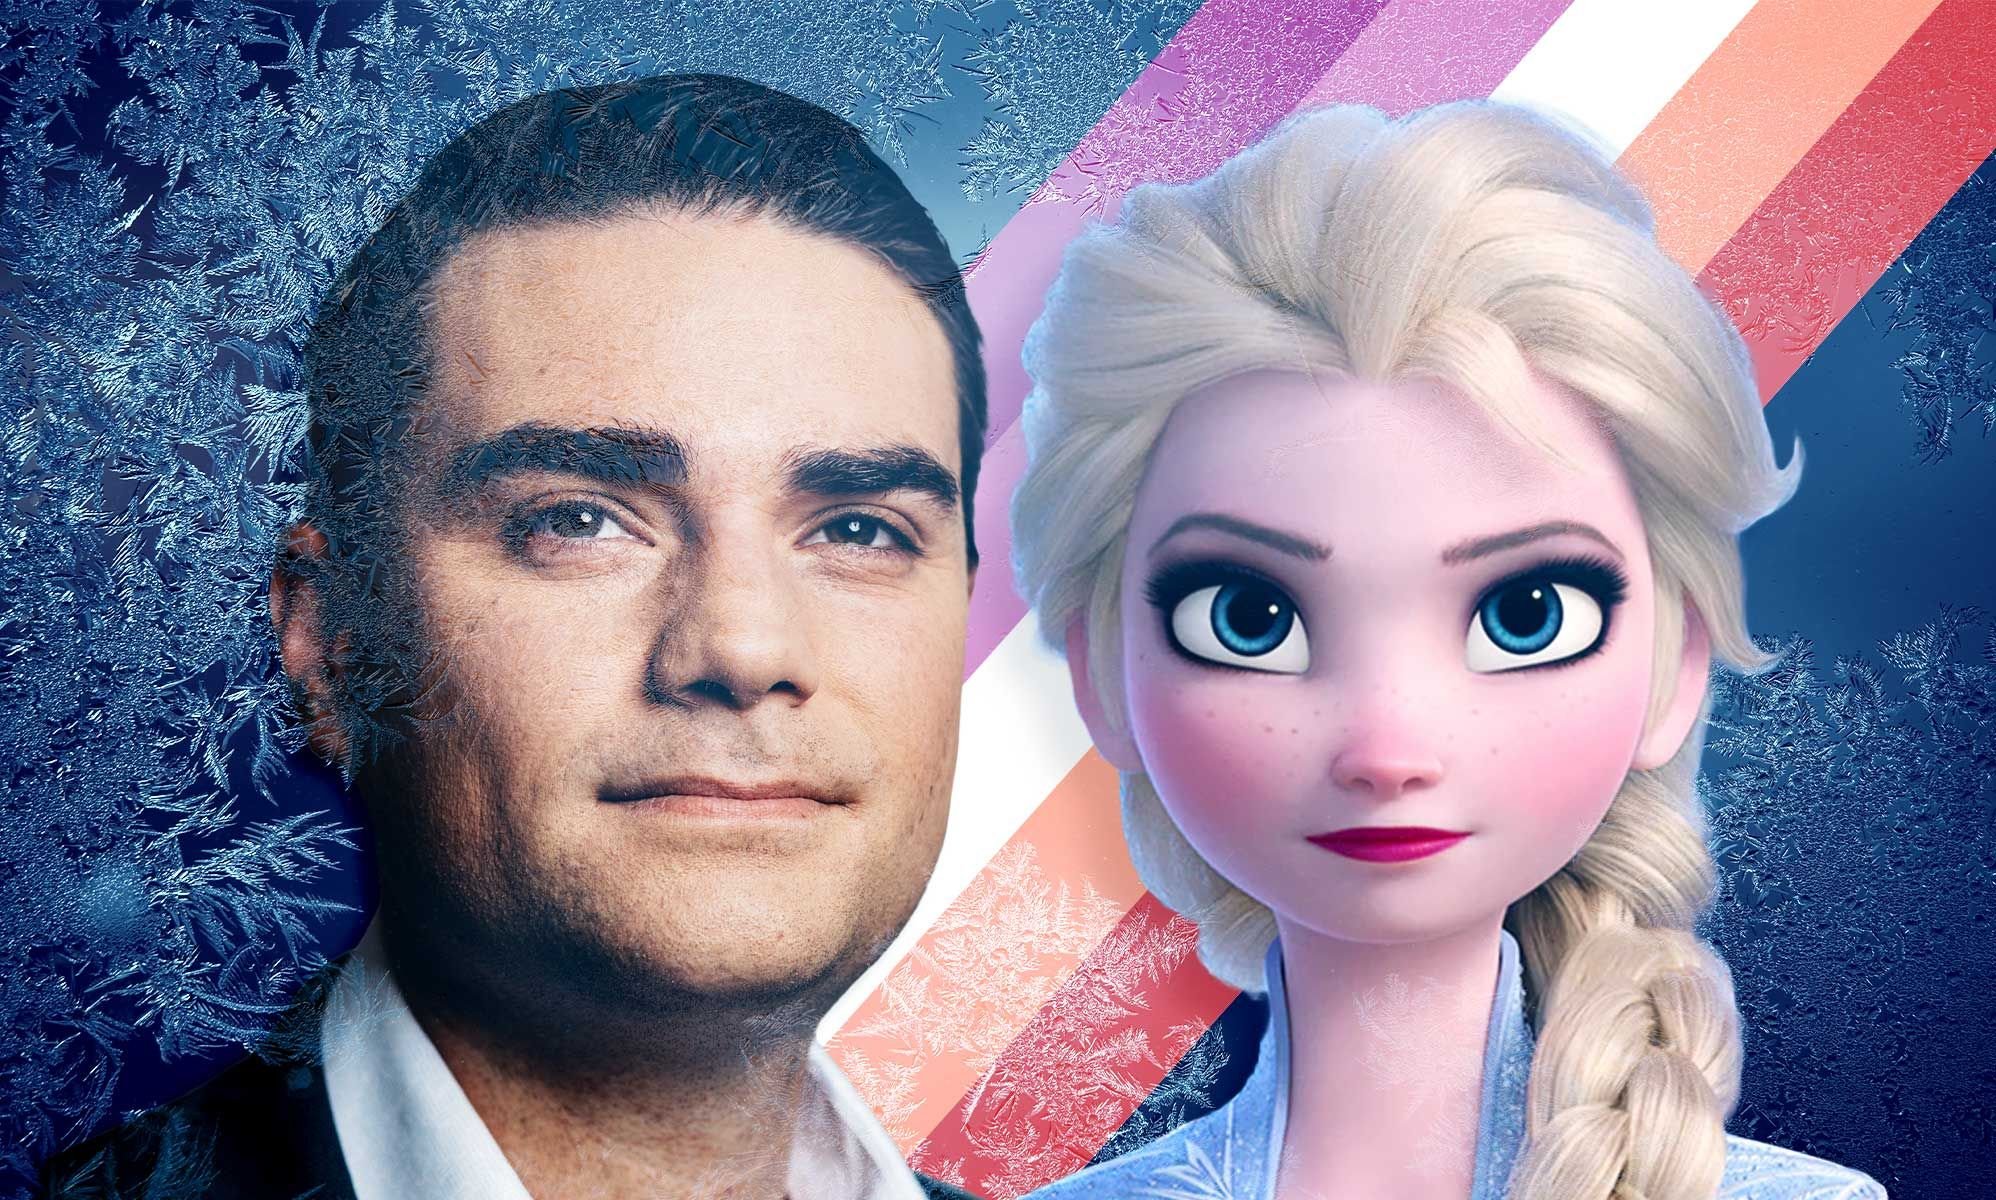 Literal snowflake Ben Shaprio is raging over Frozen’s Elsa possibly coming out as a lesbian